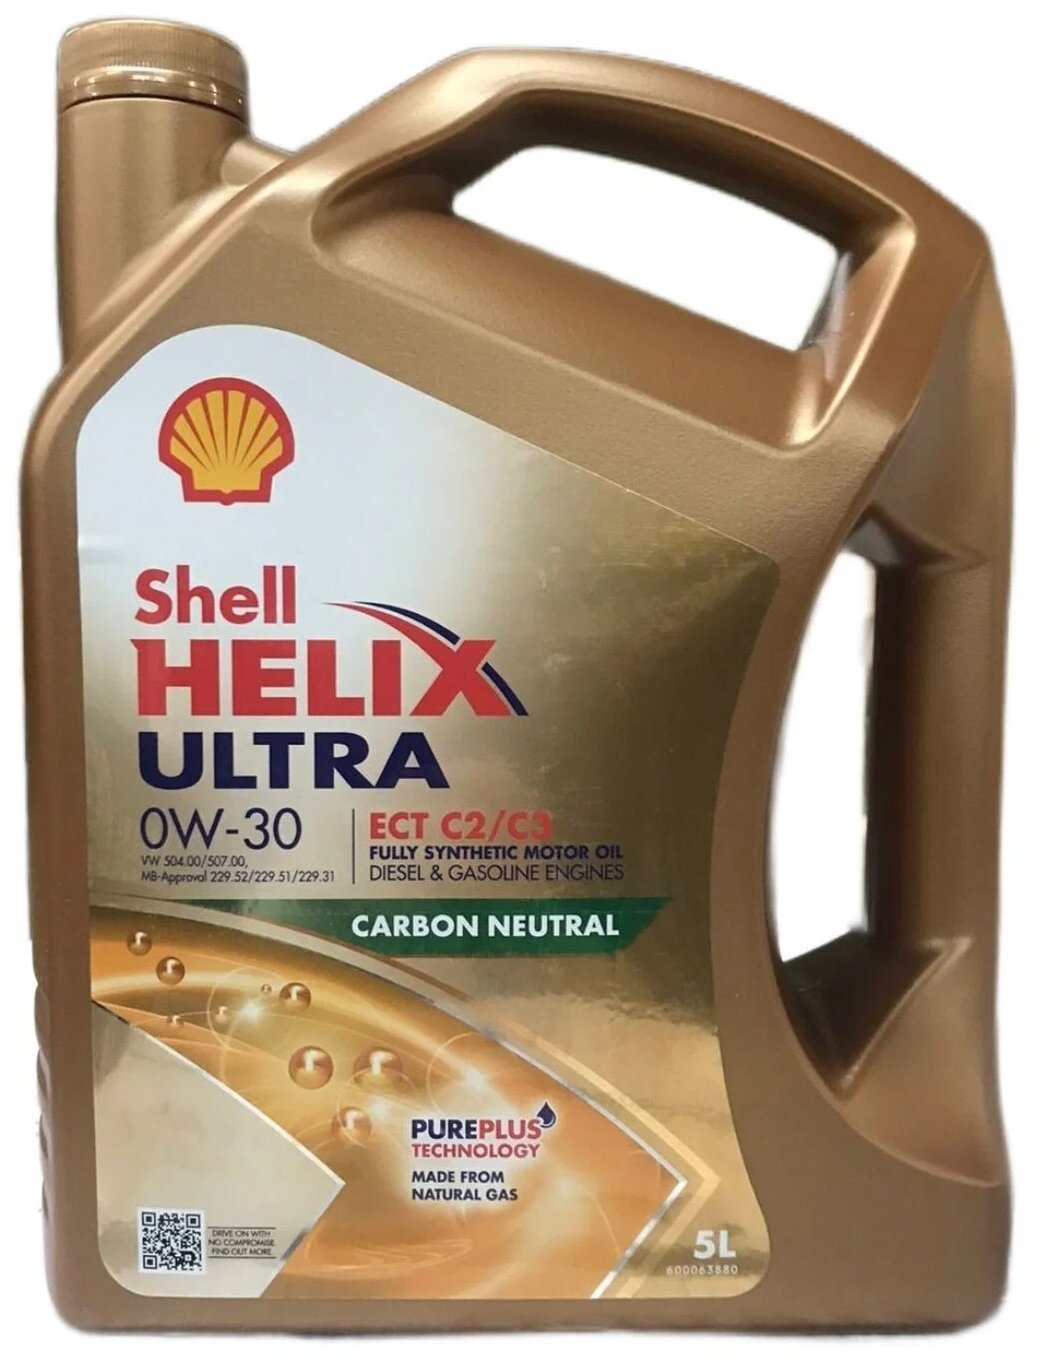 Shell Масло Моторное Shell Helix Ultra Ect 0W-30 4Л.